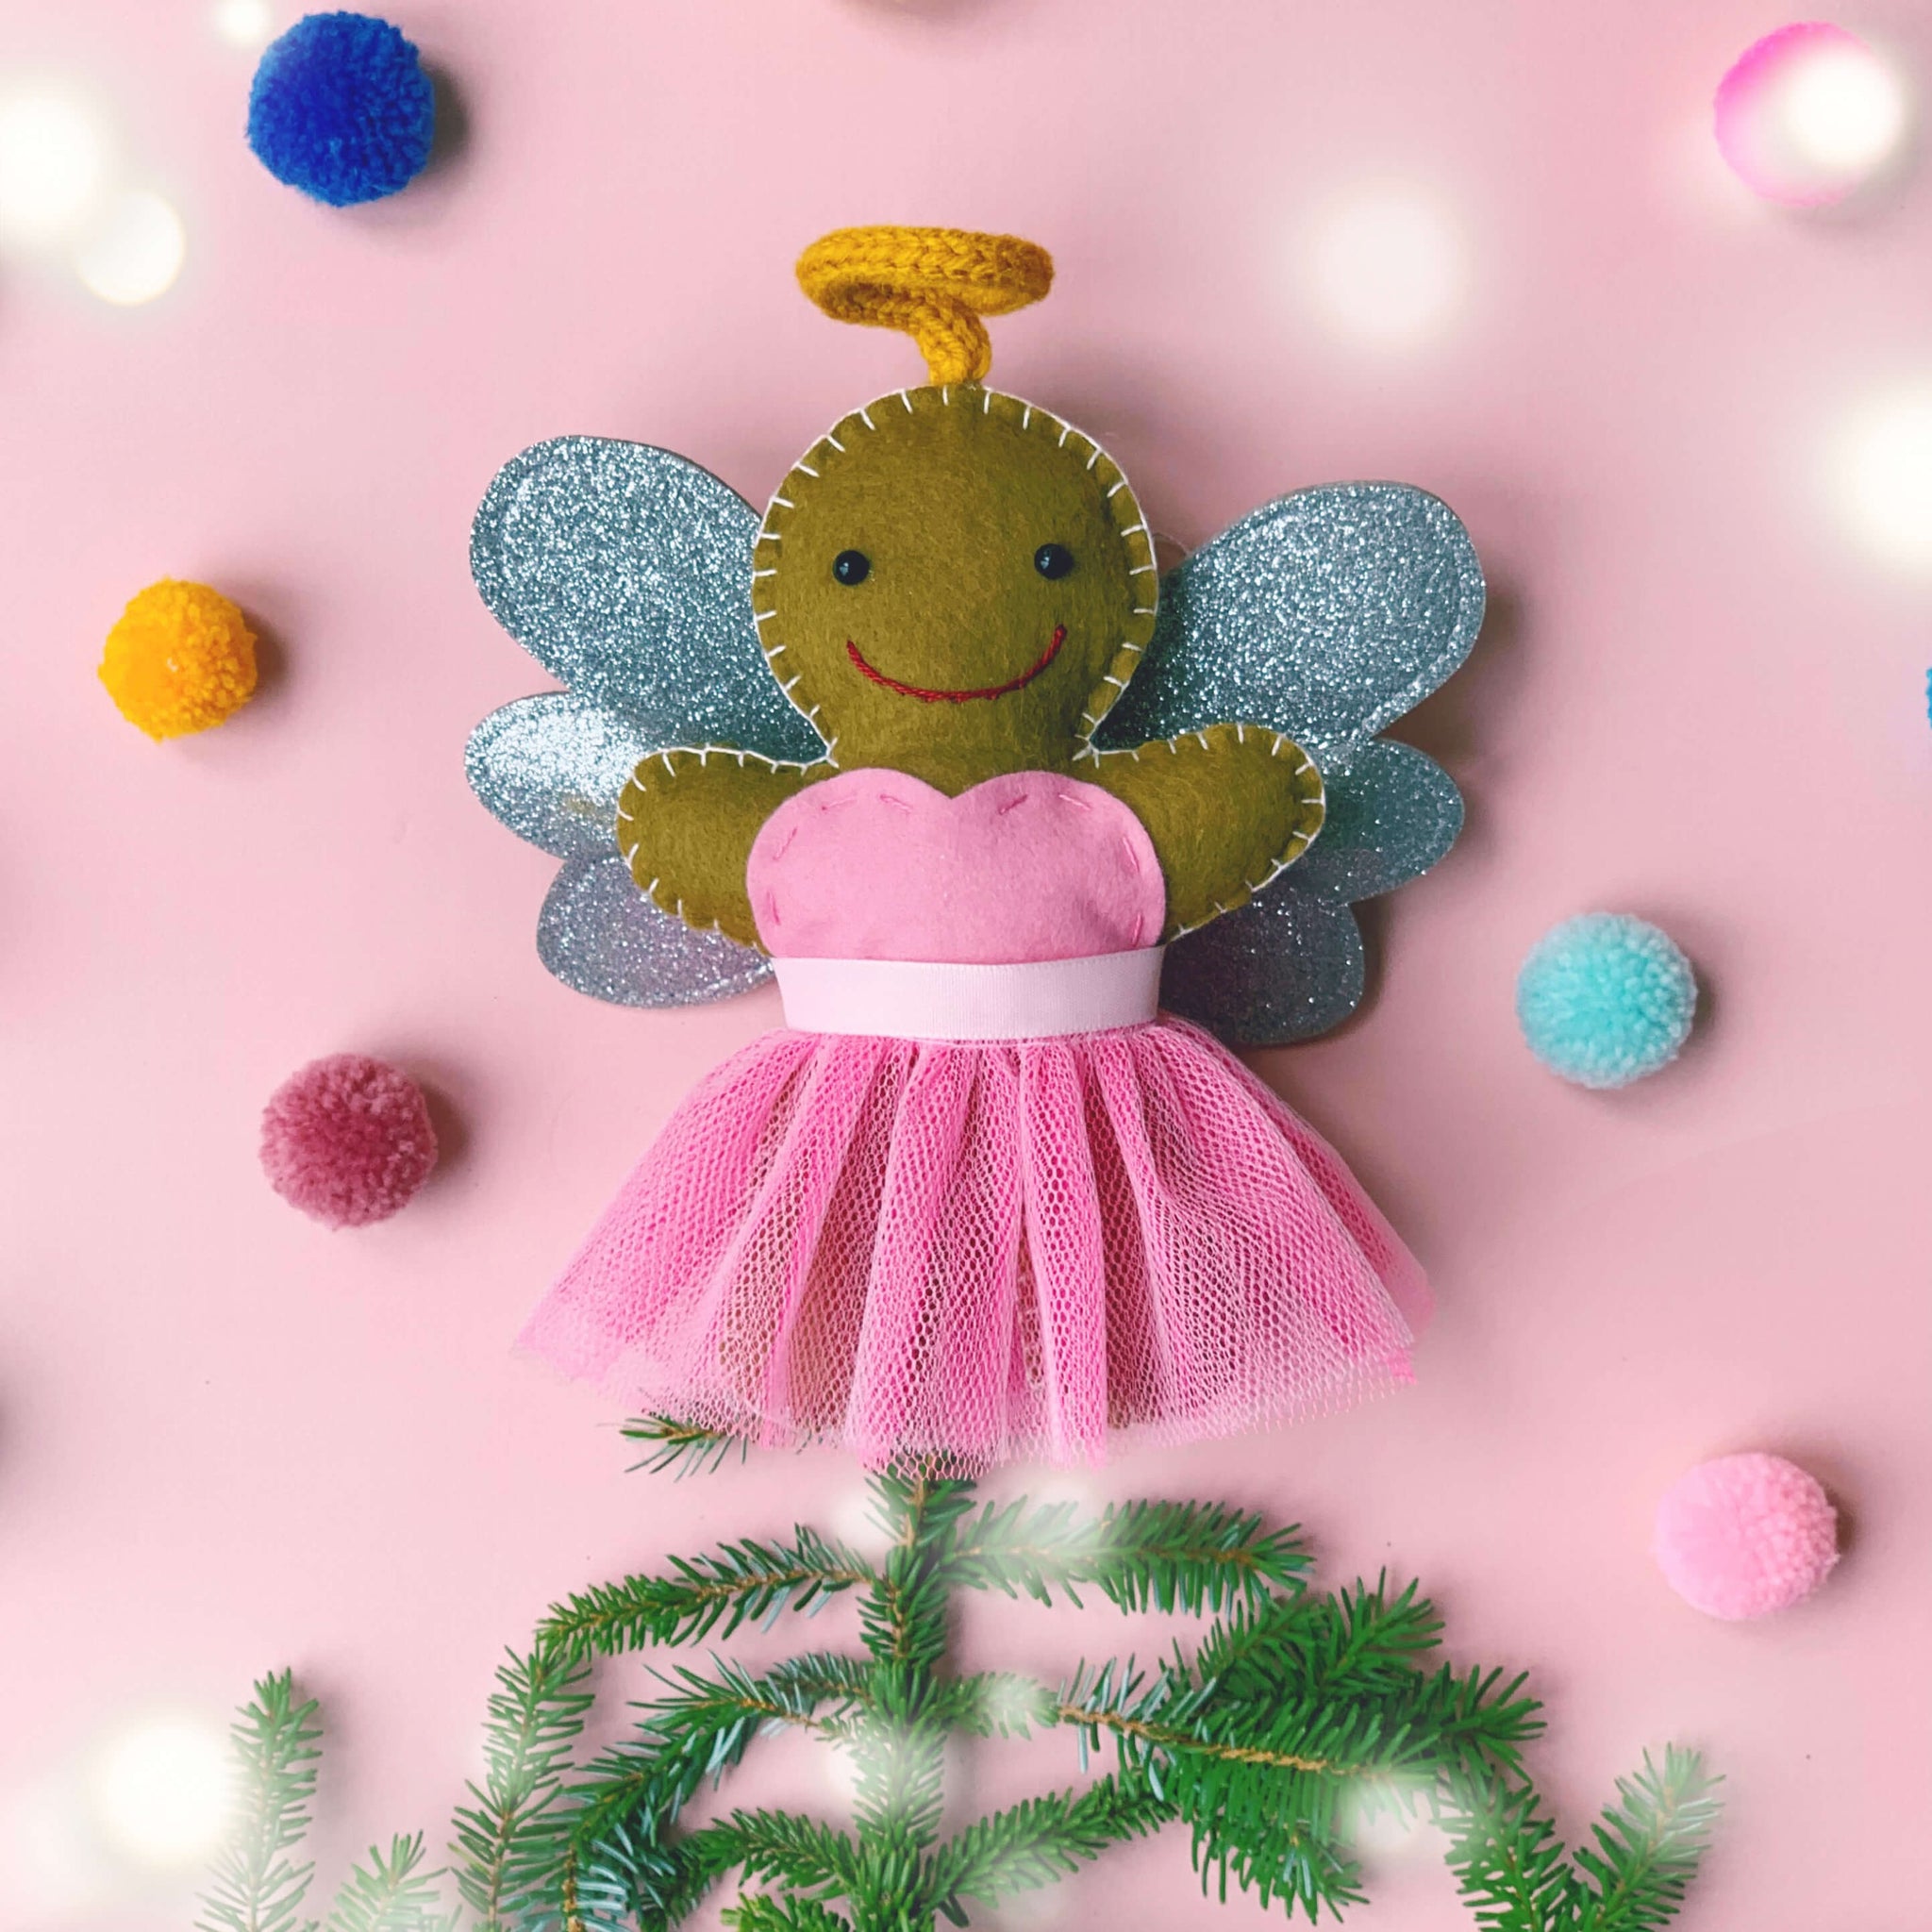 A Pink and Sea Foam Mary's Angels Christmas Tree - Happily Ever